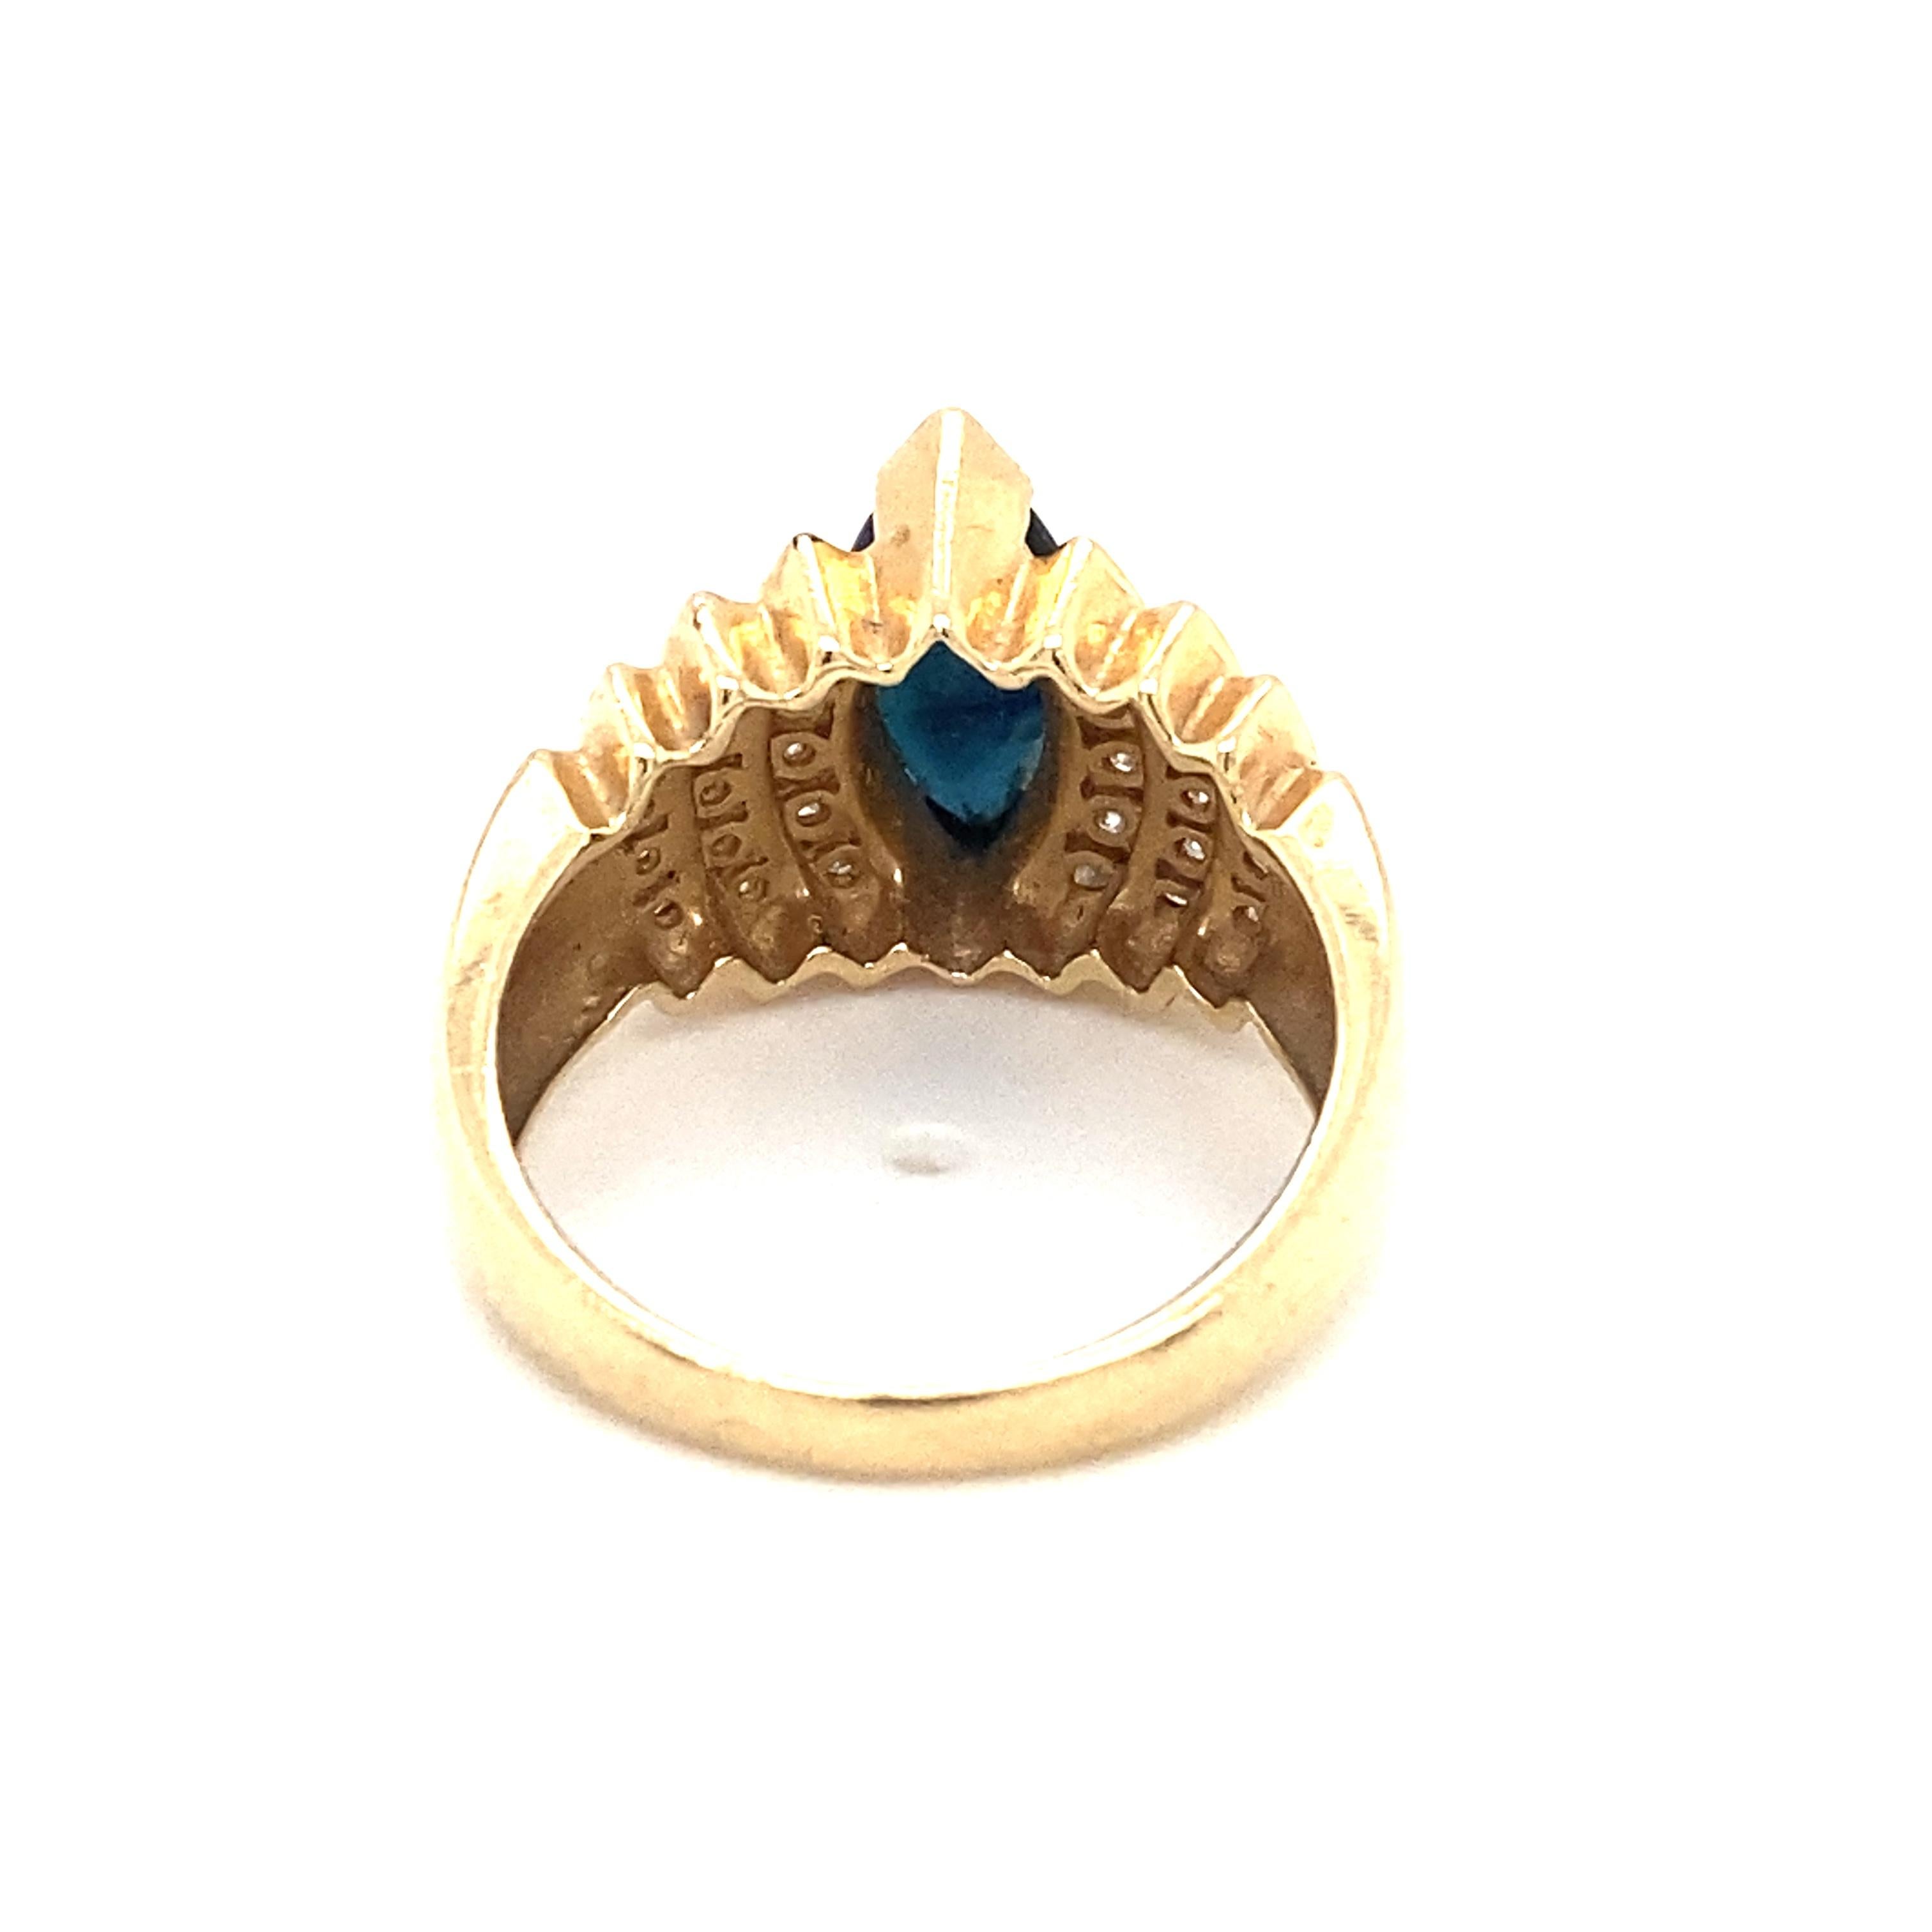 Item Details: This ring has a marquise sapphire and accent diamonds in a waterfall design.

Circa: 2000s
Metal Type: 14k yellow gold
Weight: 7.7g
Size: US 8, resizable